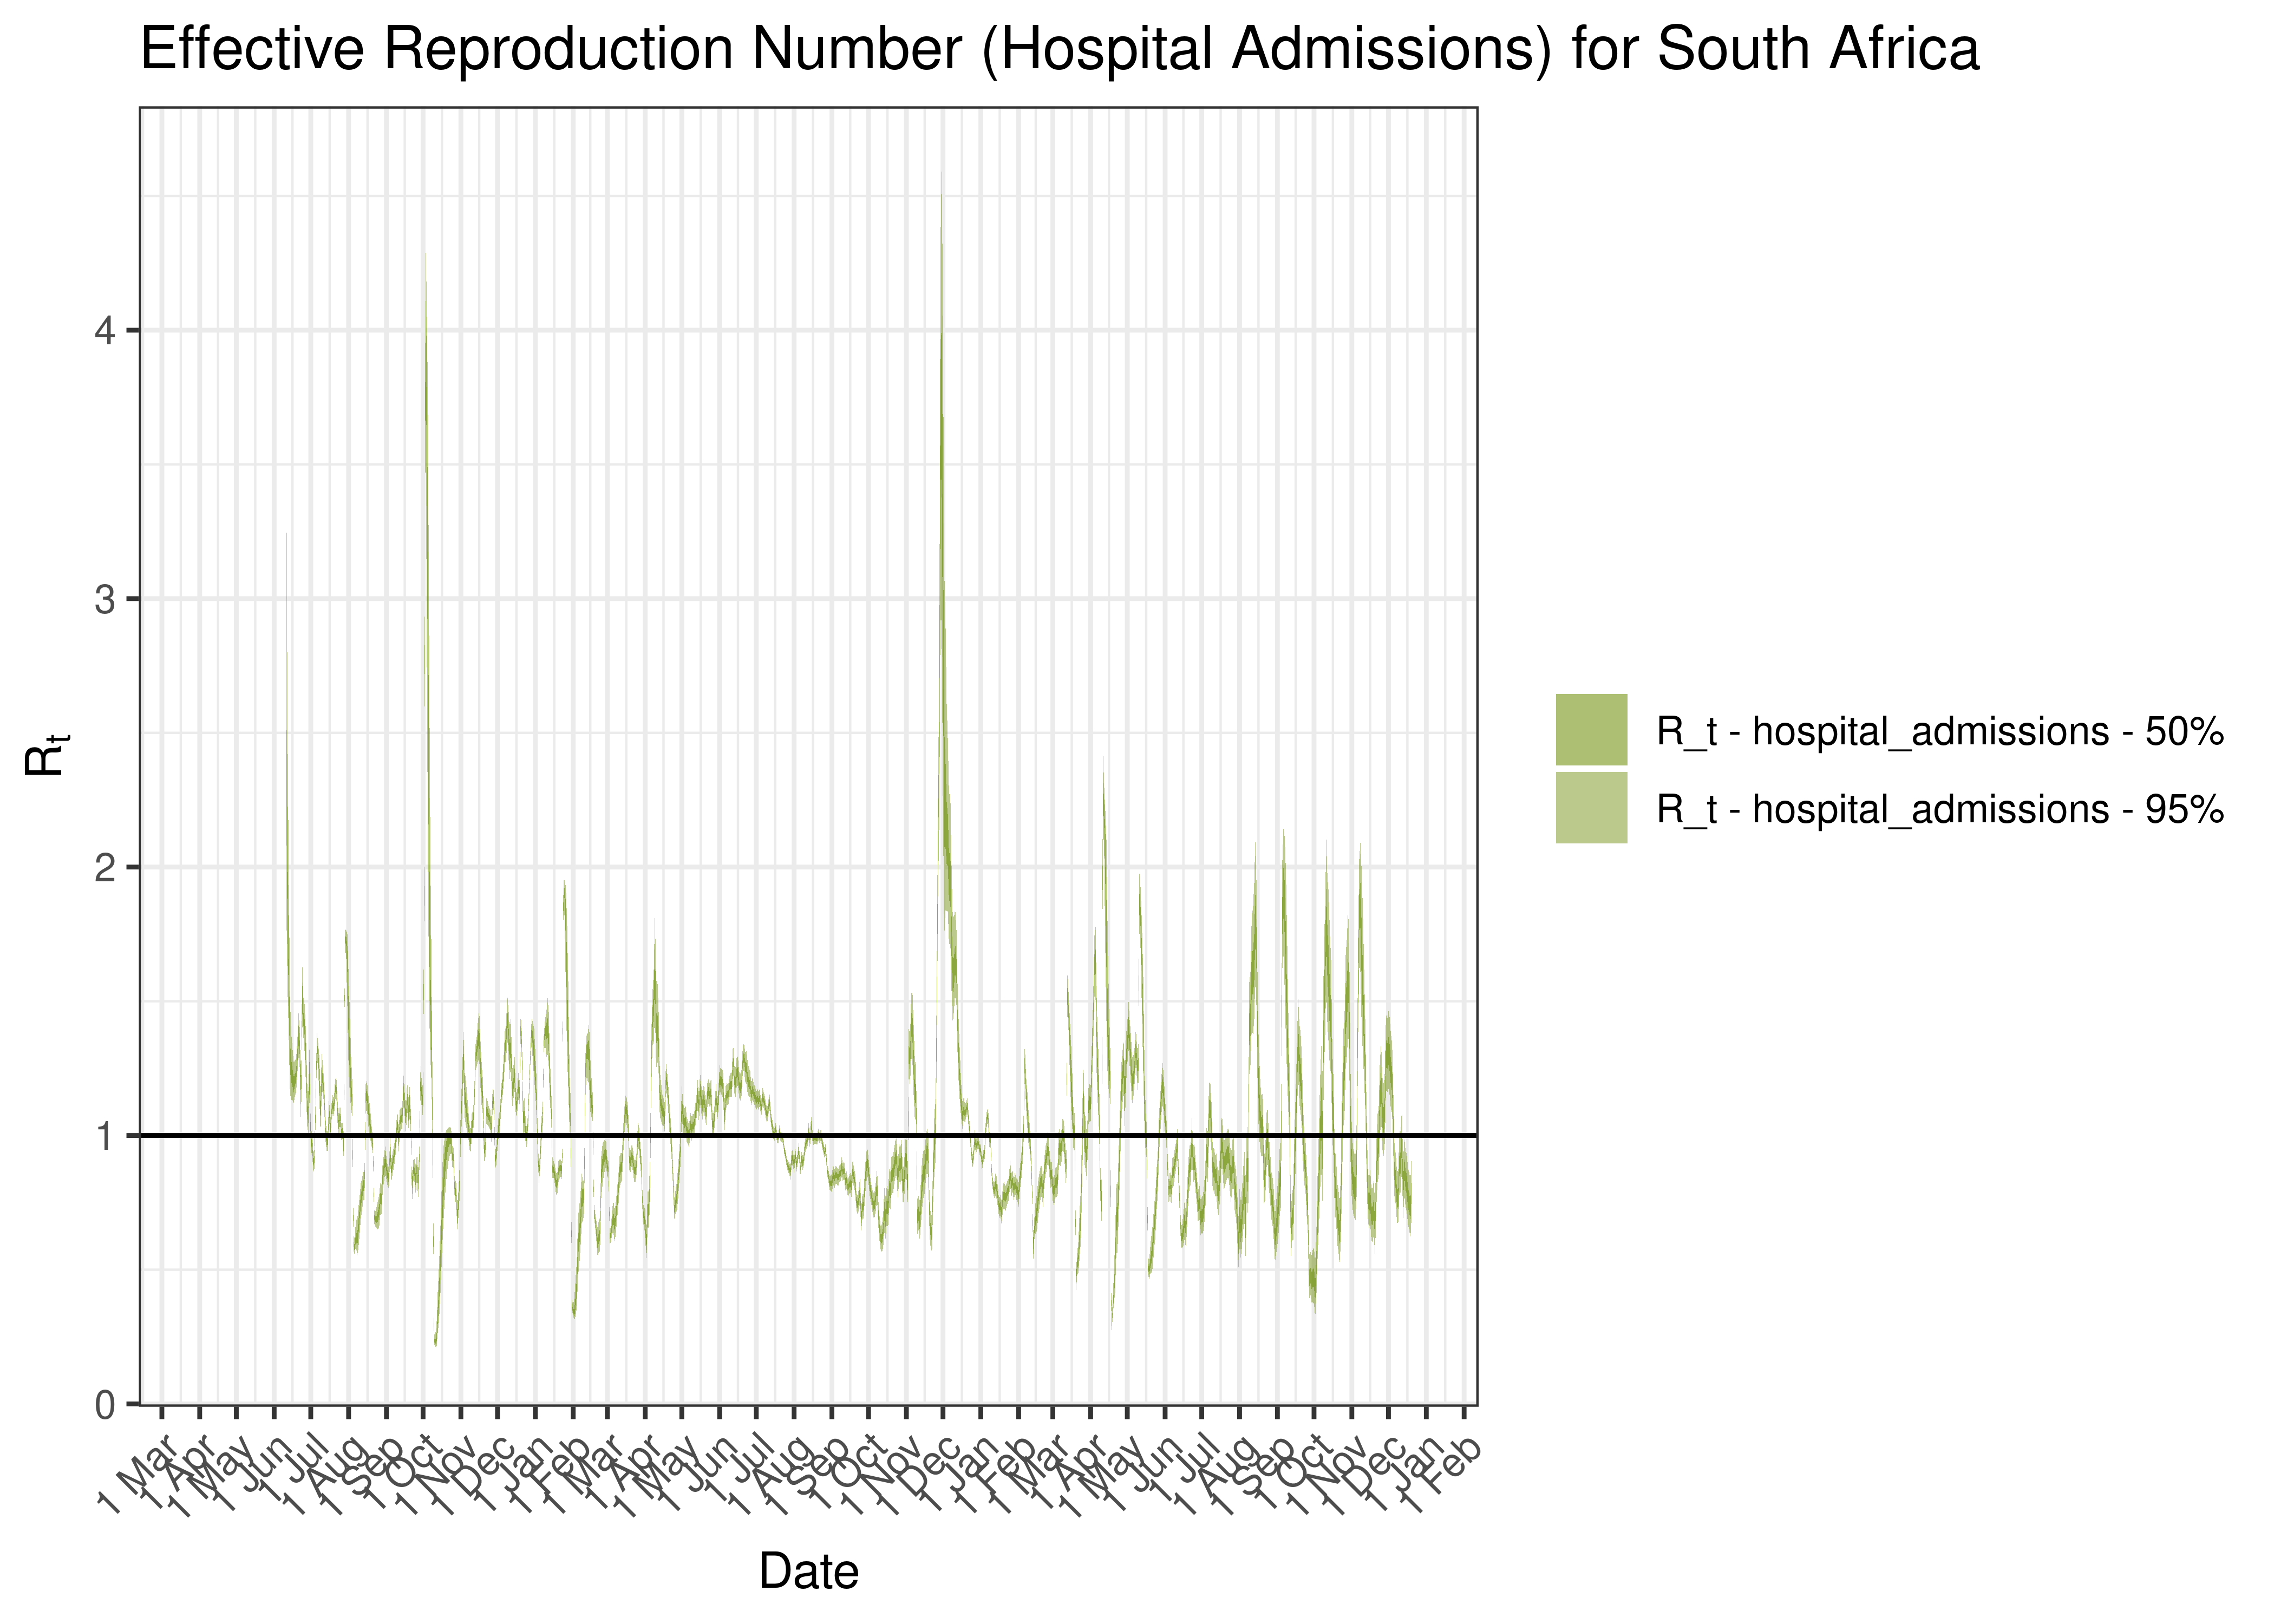 Estimated Effective Reproduction Number Based on Hospital Admissions for South Africa since 1 April 2020